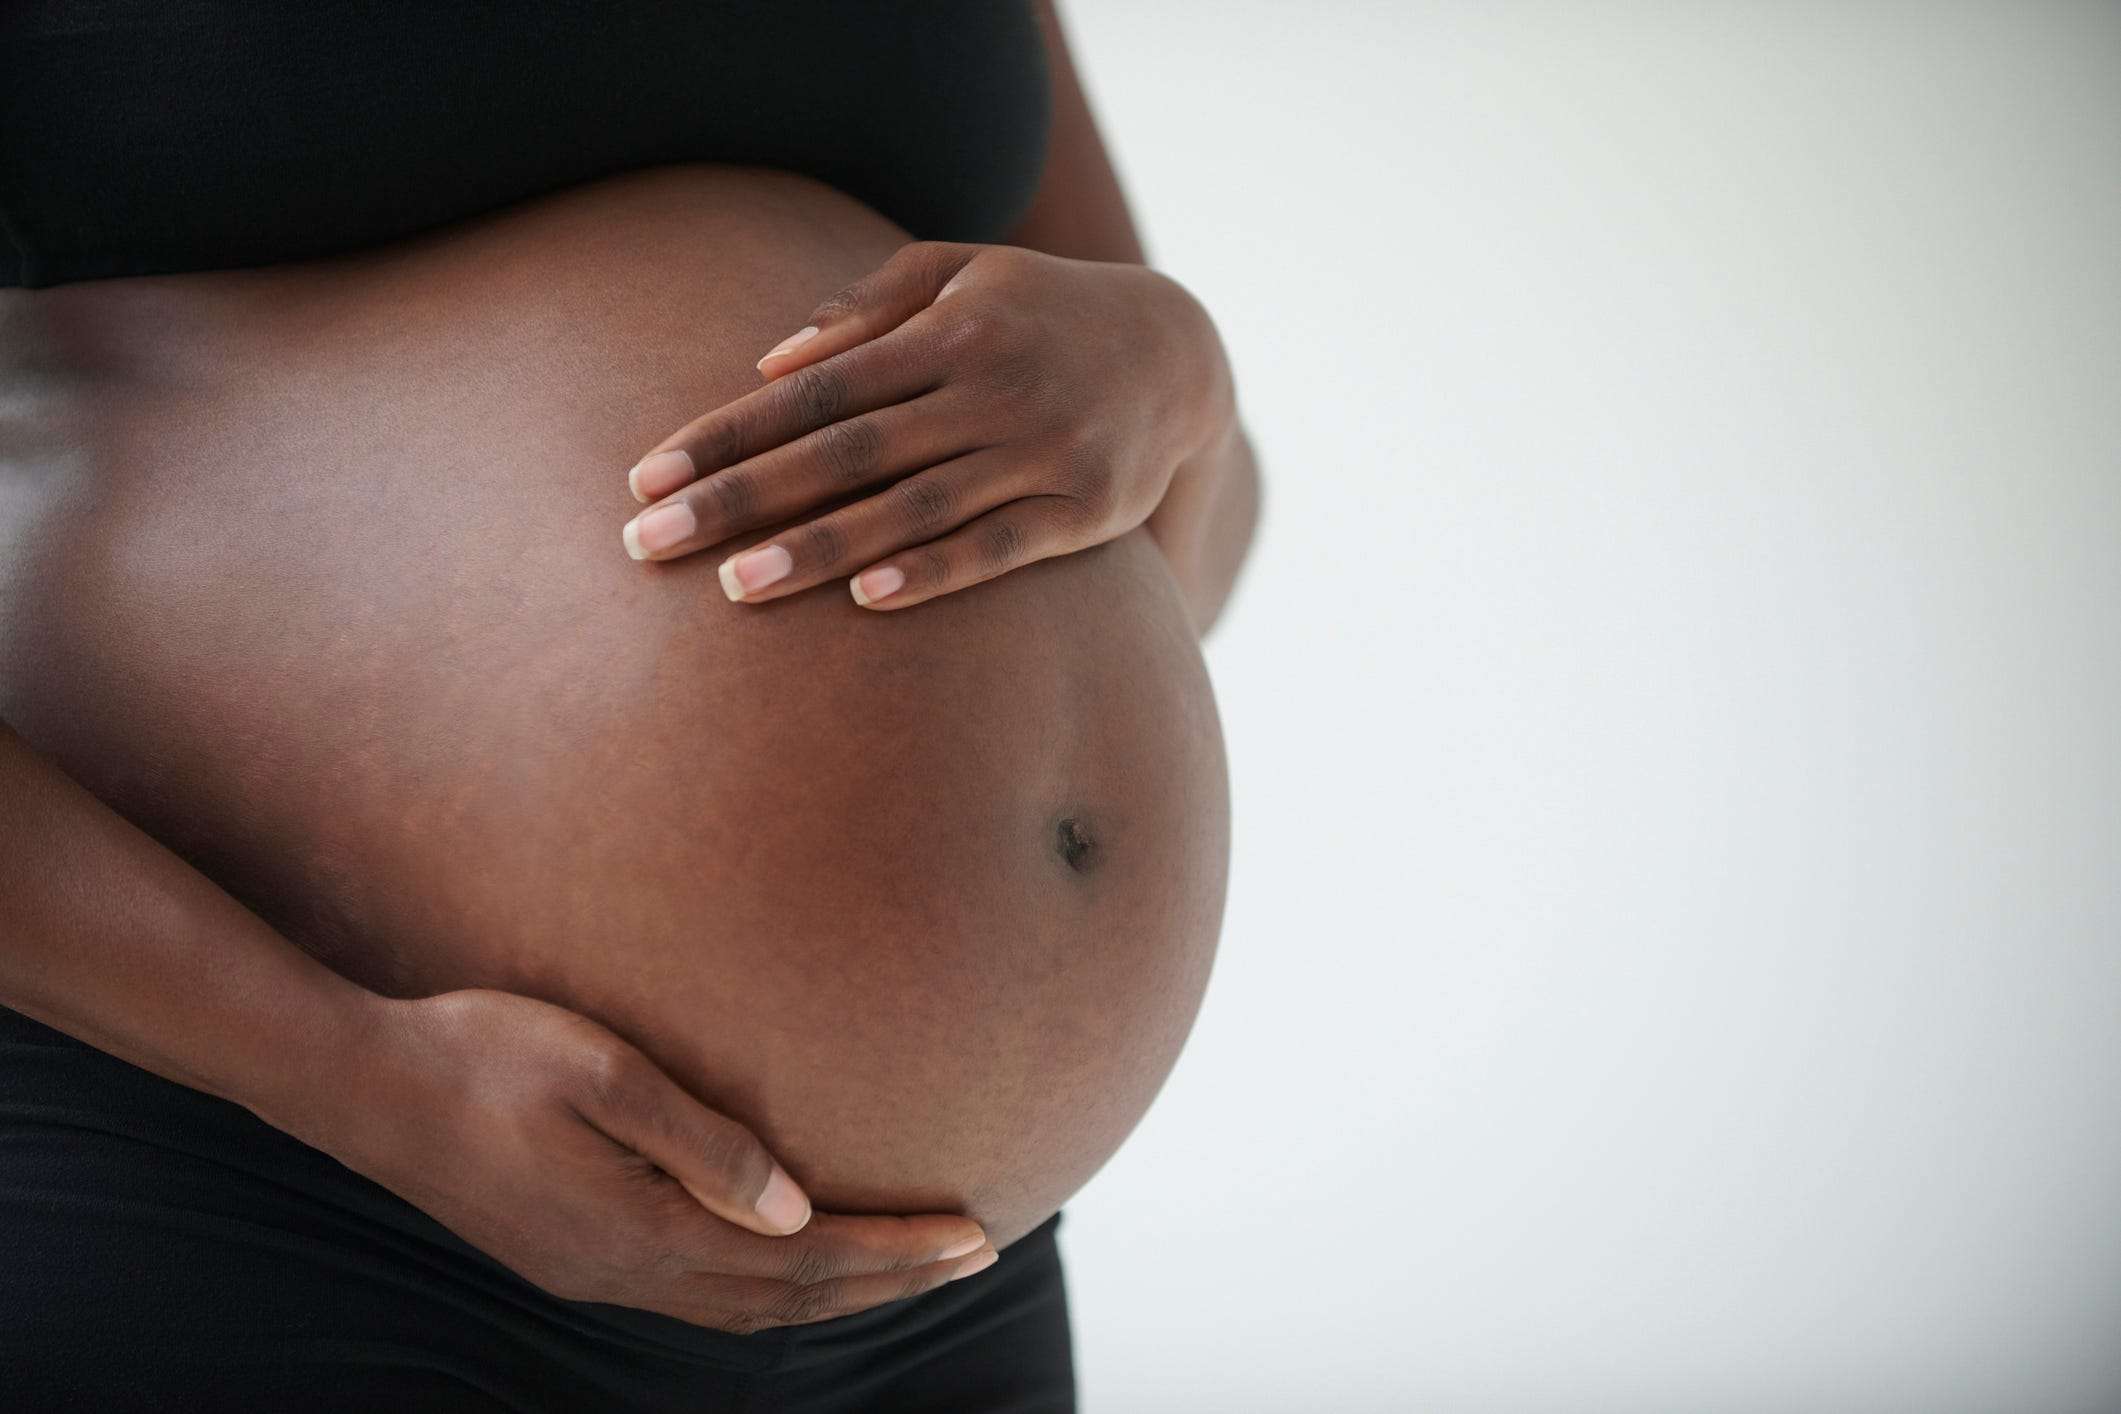 Black women face a high risk of deadly pregnancy complications. Here's